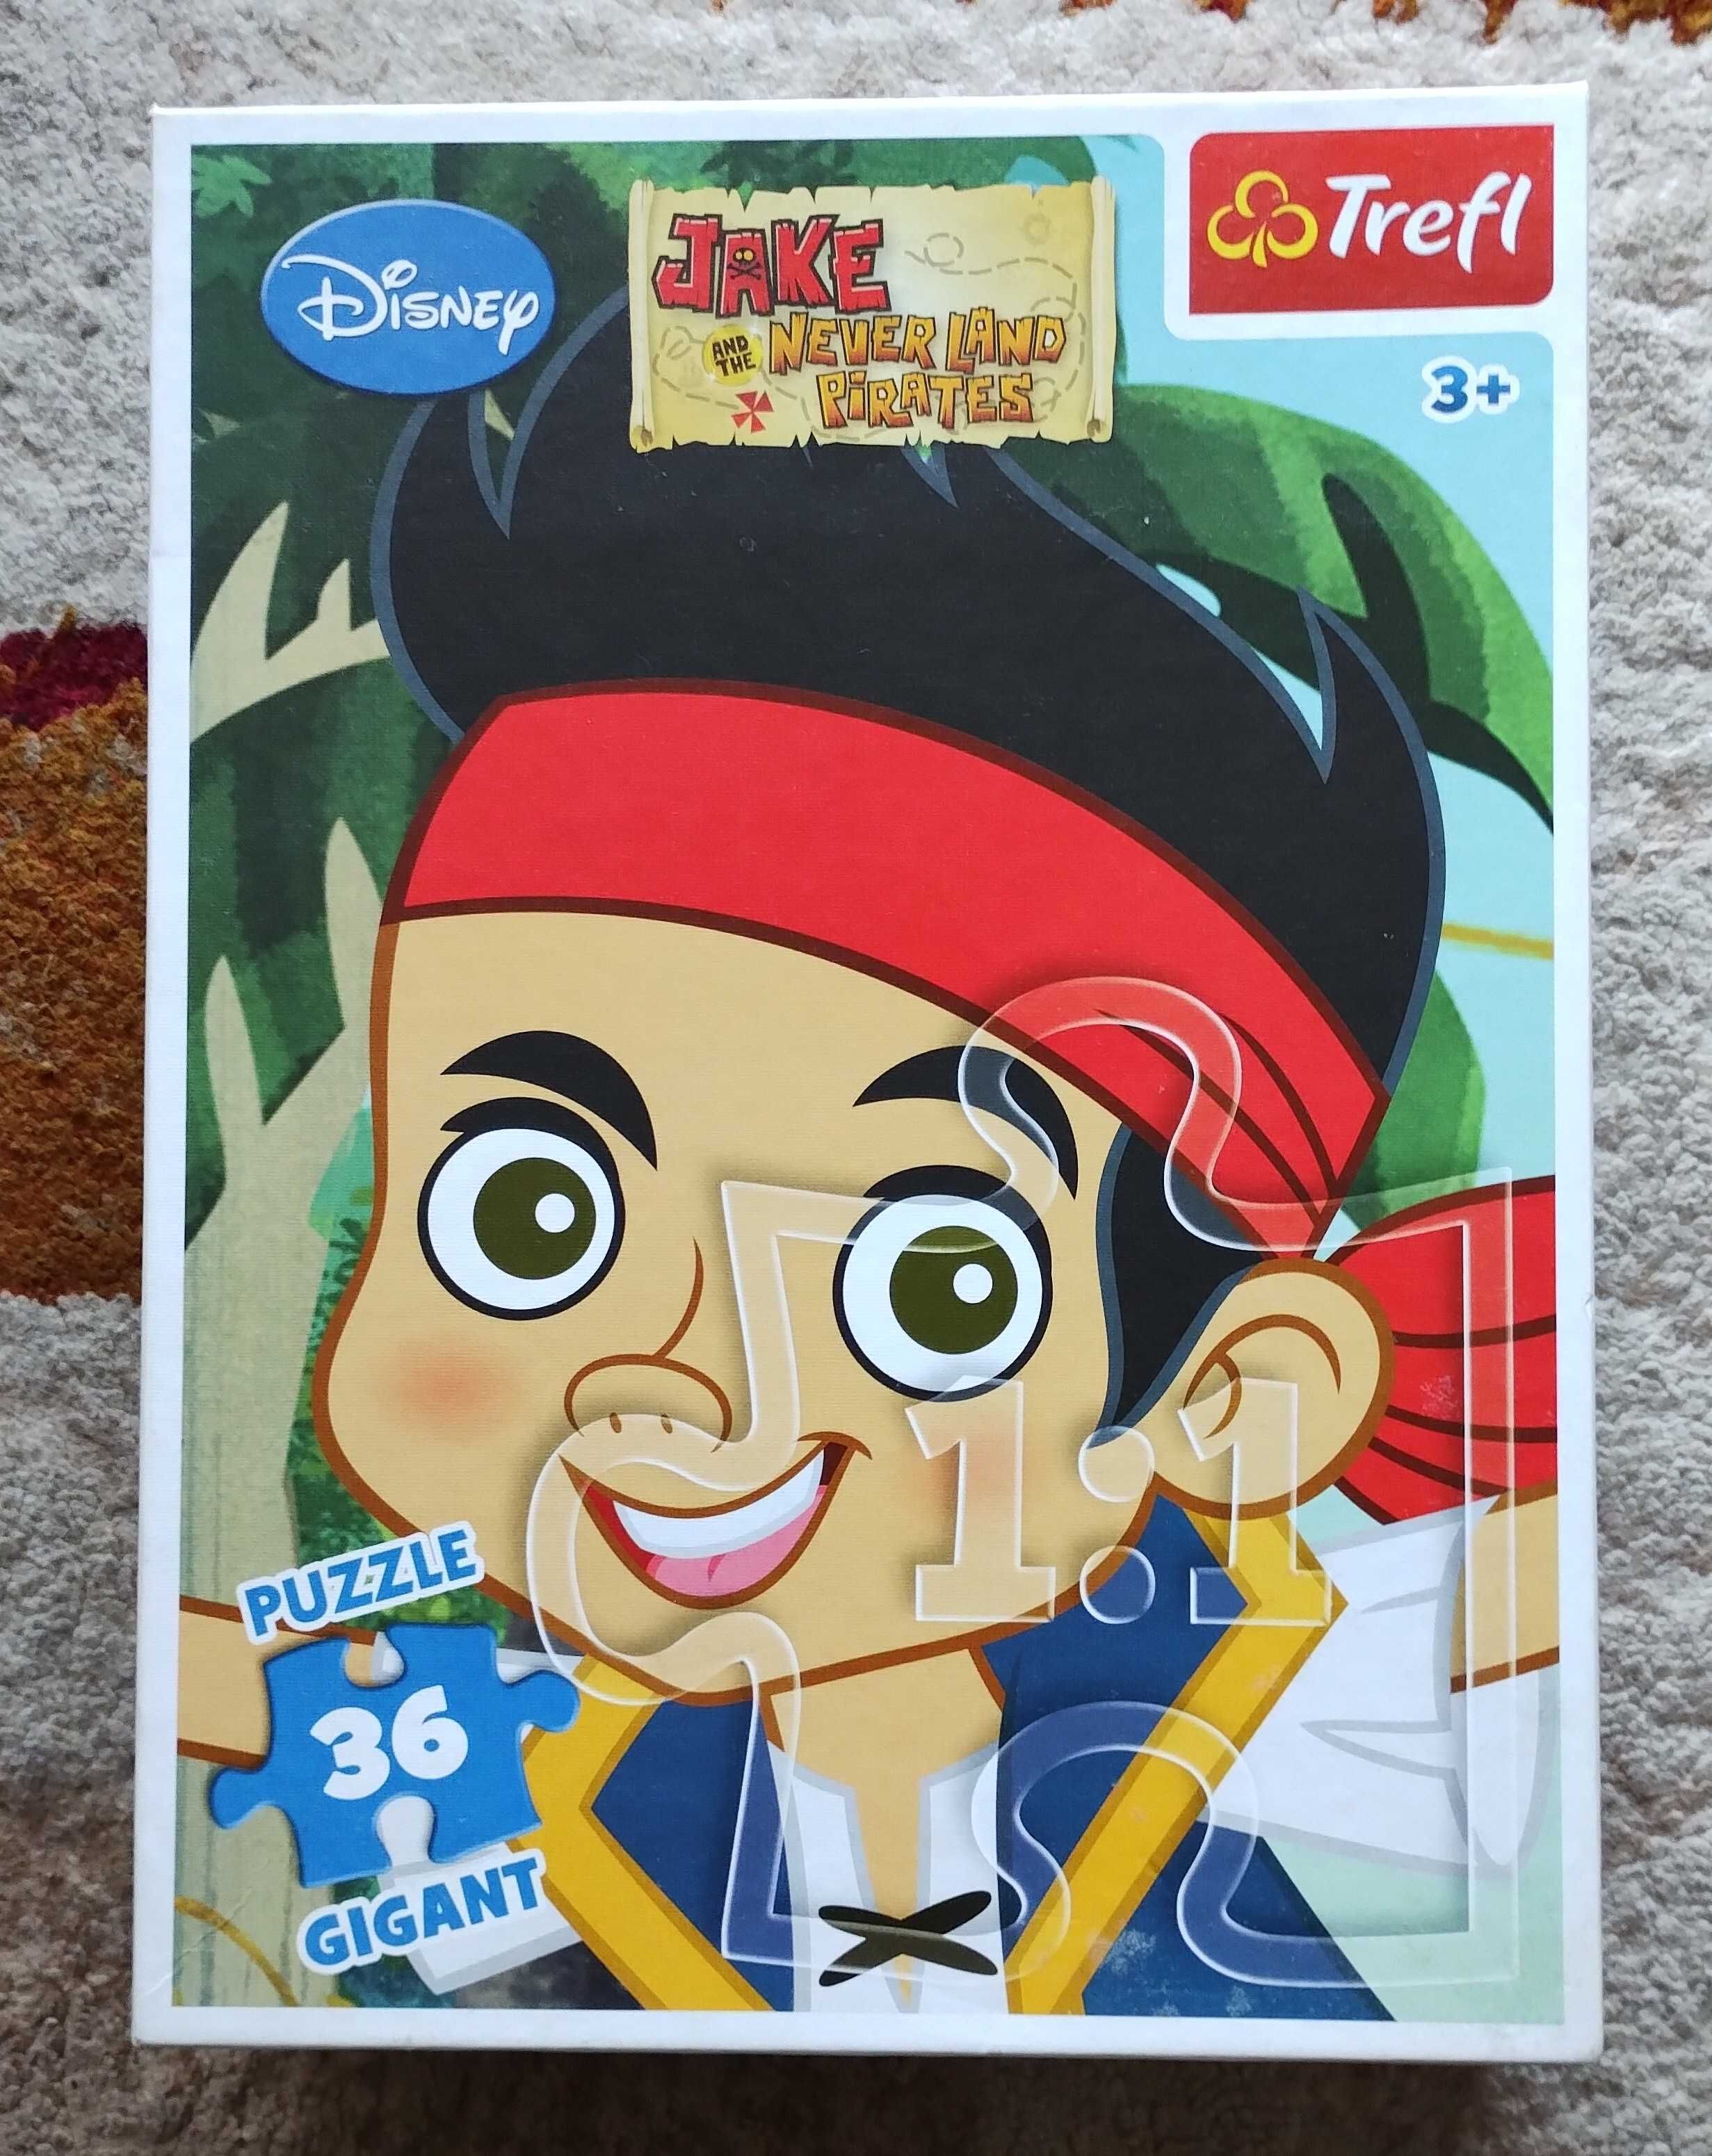 Puzzle gigant- Jake and never land pirates